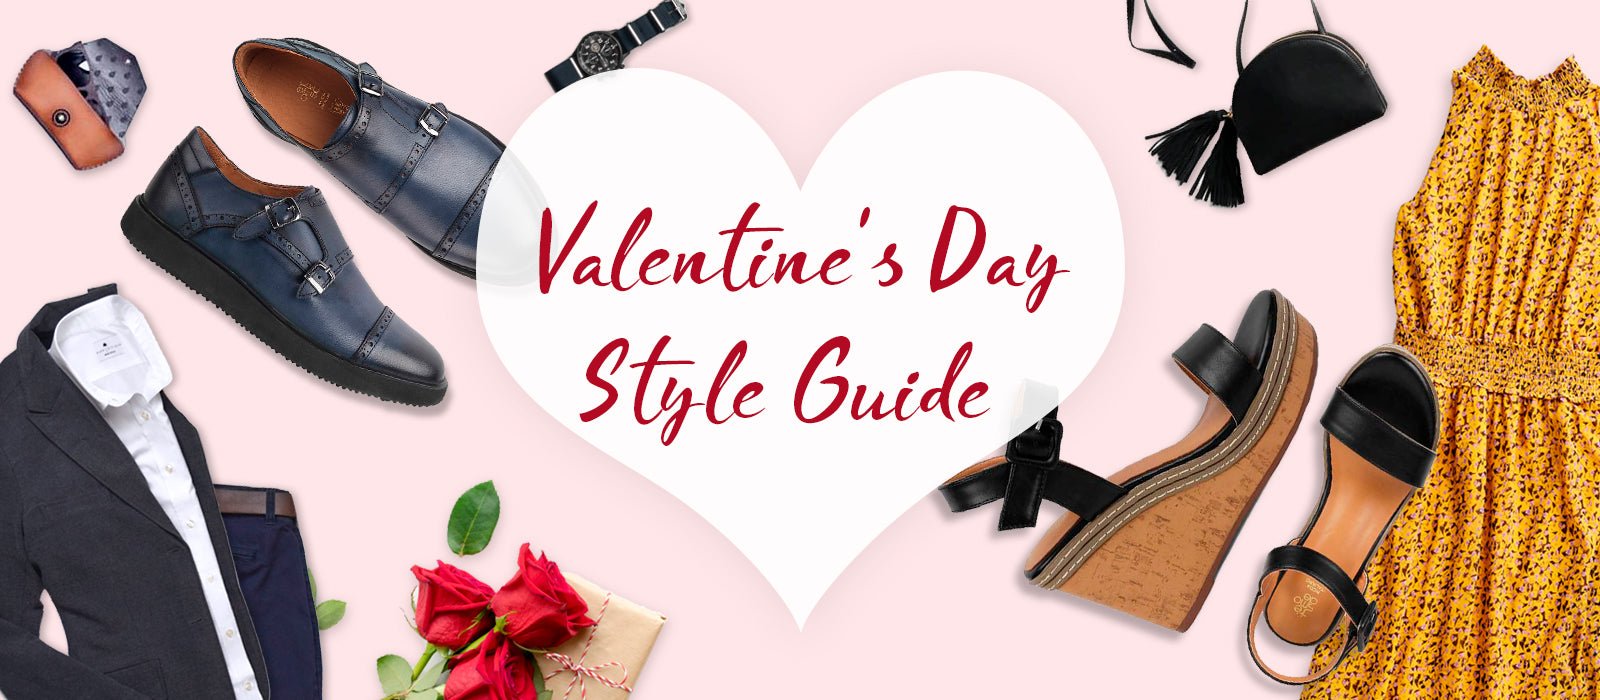 All you need to dress chic this Valentine's! - Tresmode